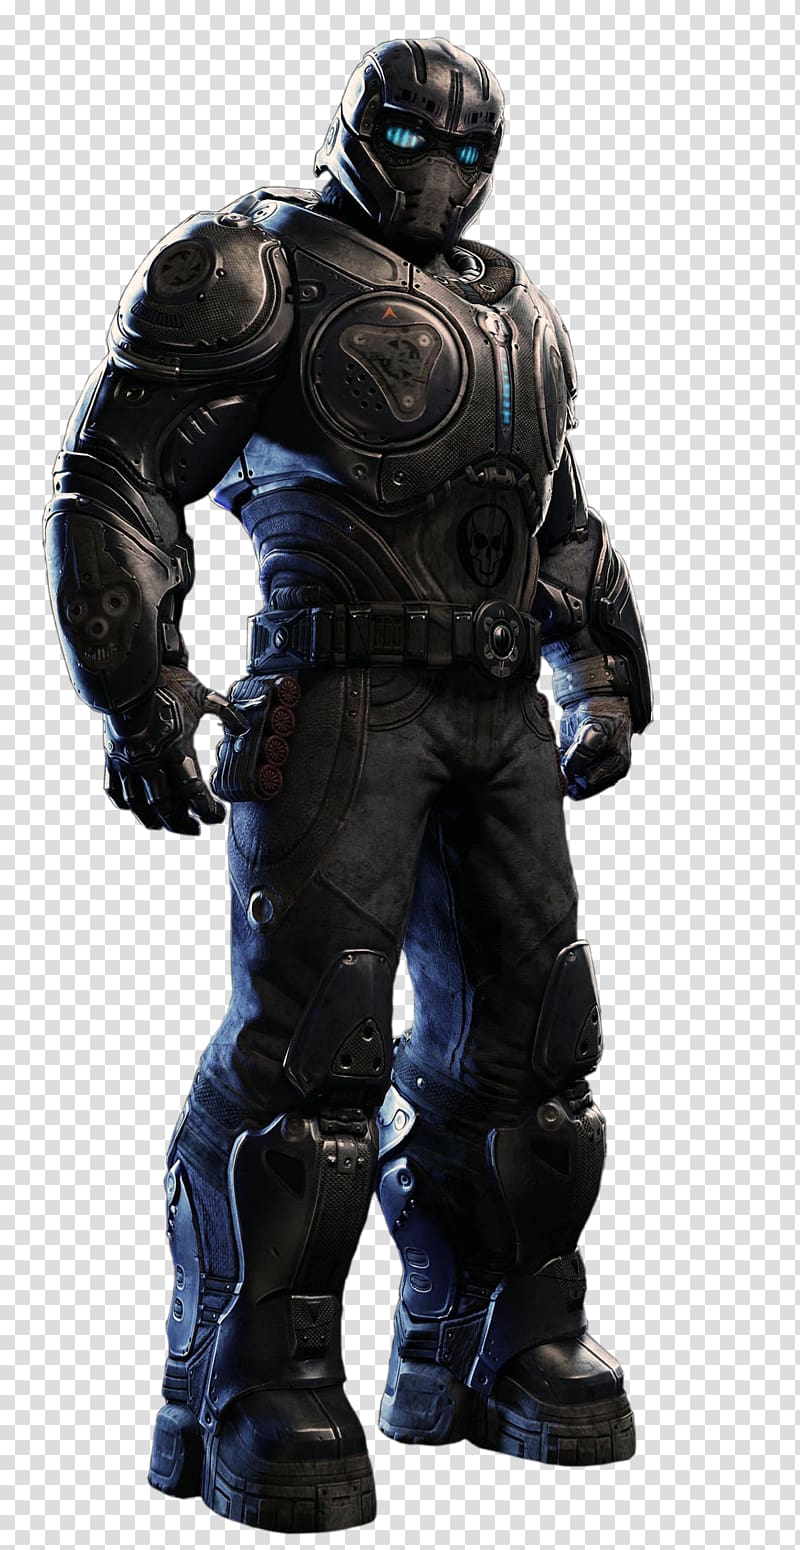 Gears of War 3 Gears of War 4 Gears of War: Judgment Gears of War: Ultimate Edition, Gears of War transparent background PNG clipart